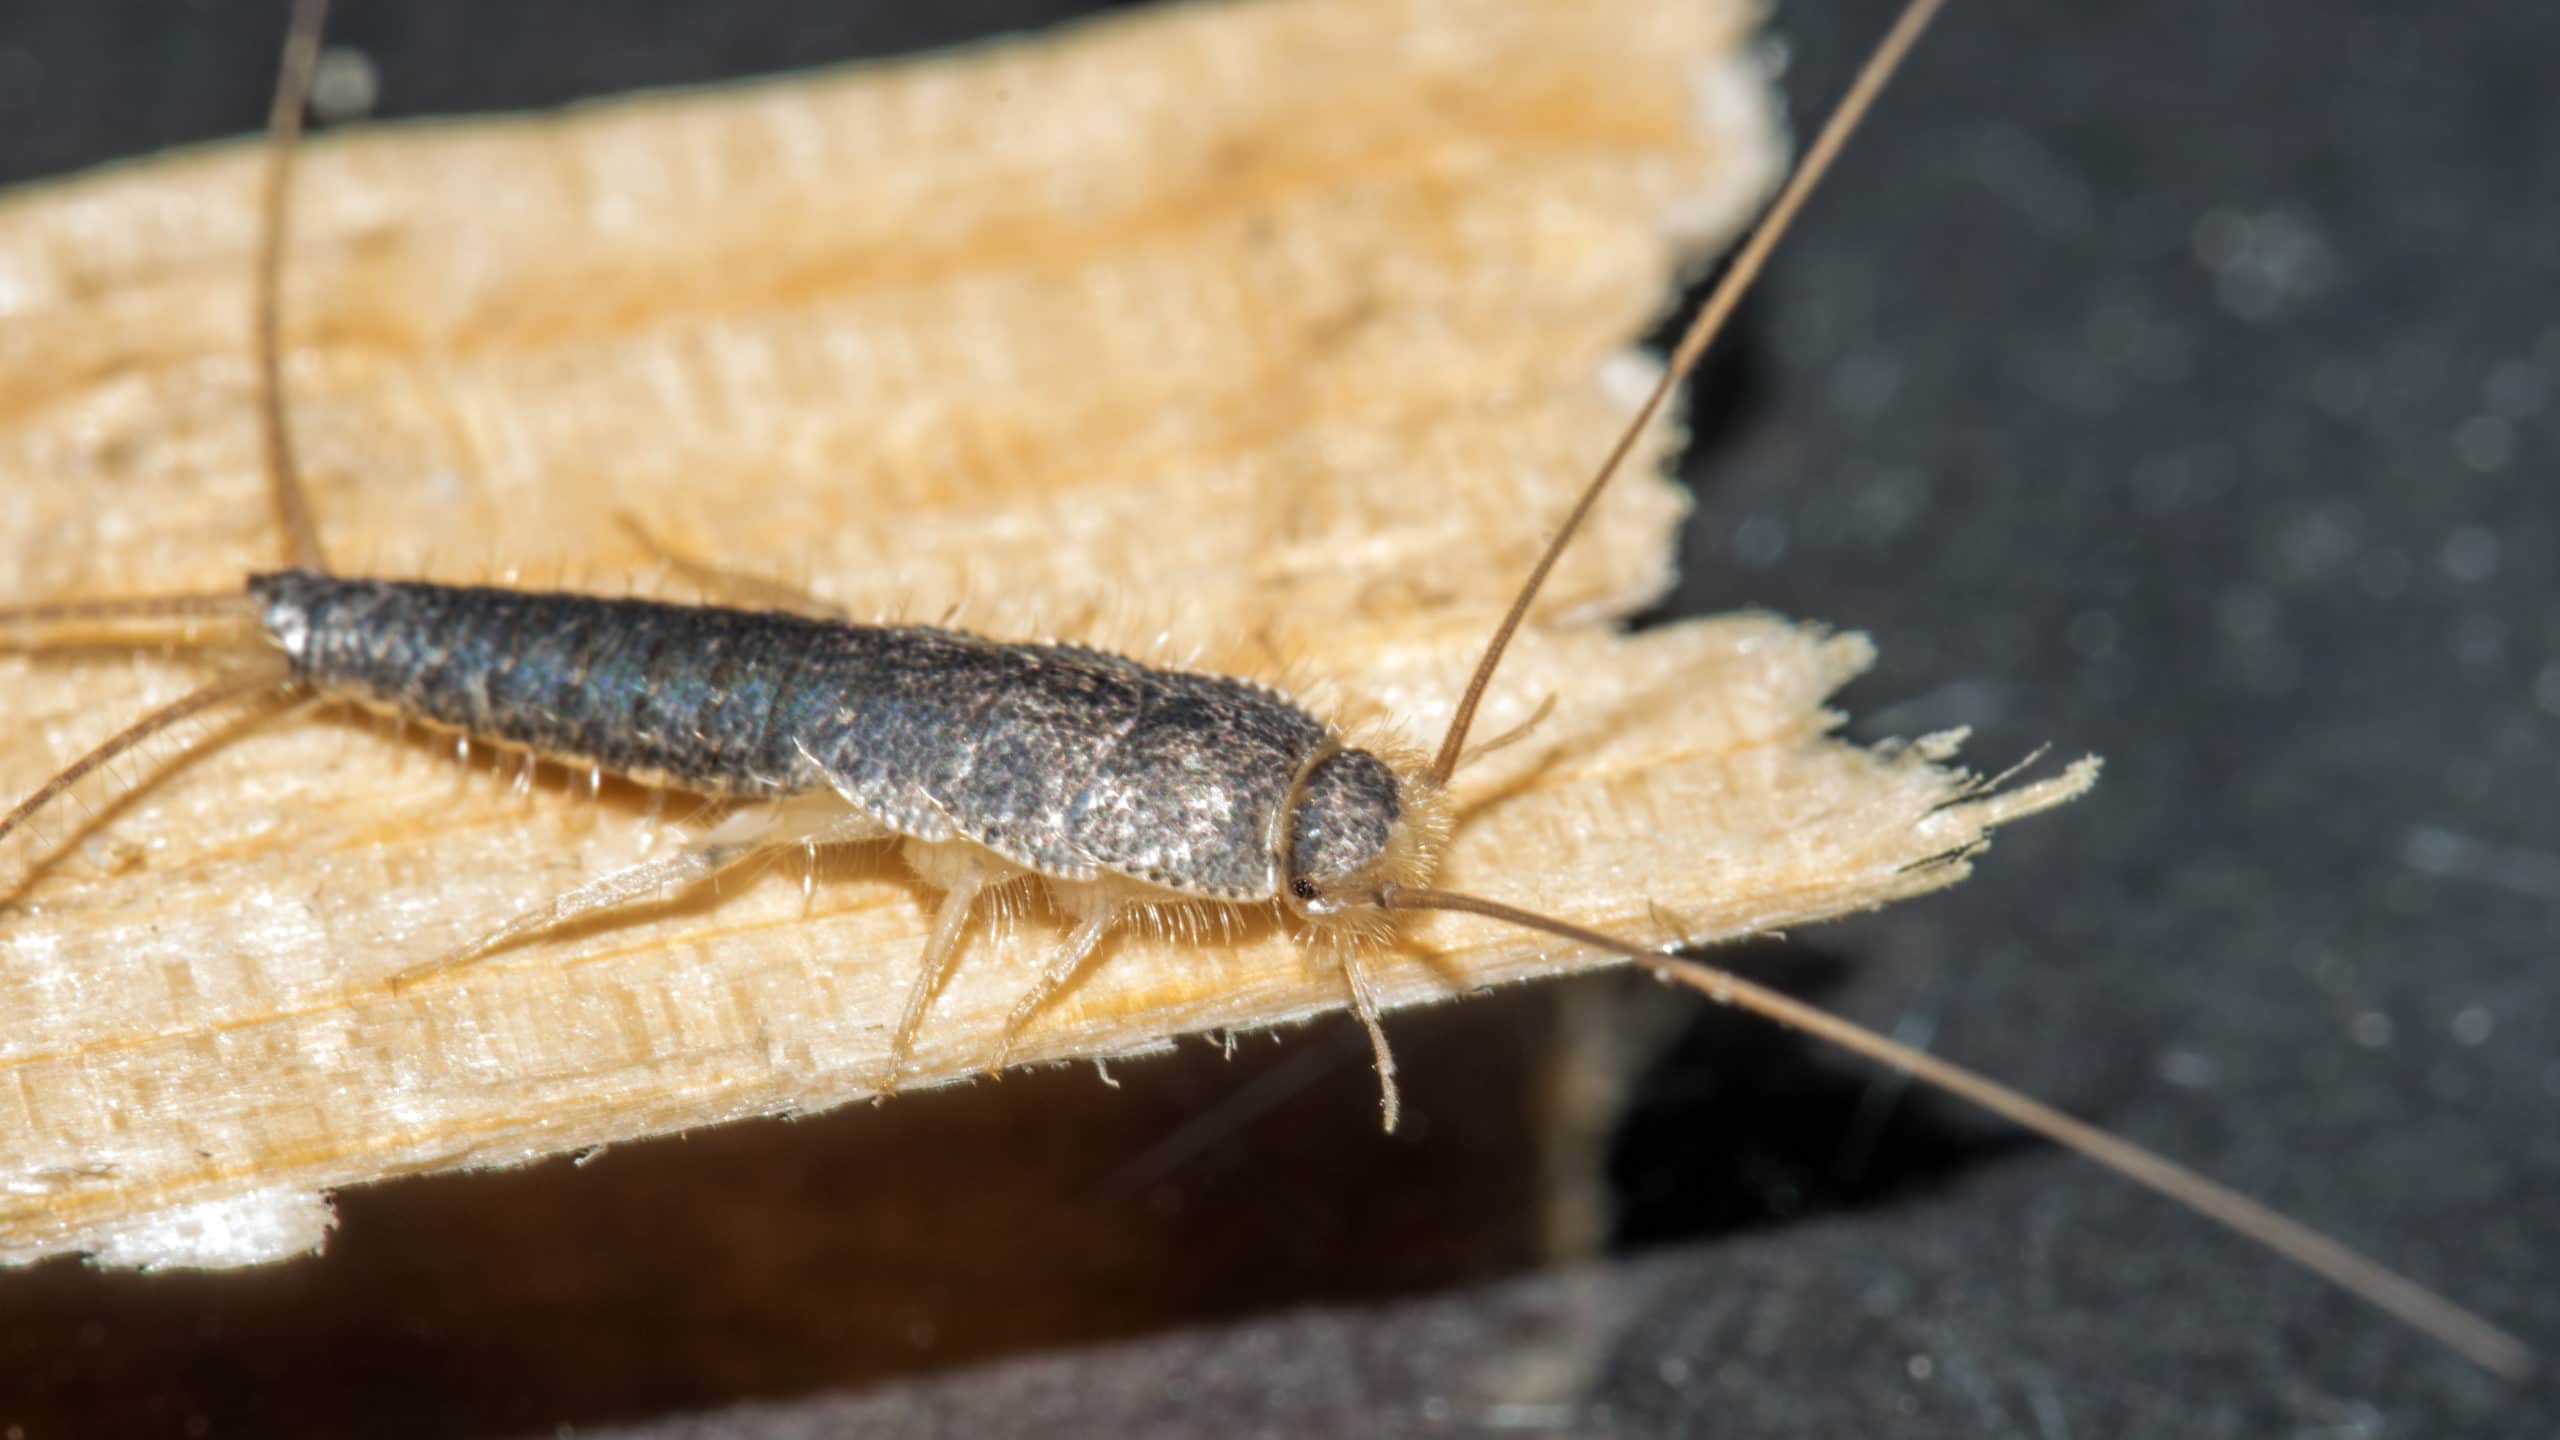 How To Get Rid Of Silverfish – What Naturally Kills Silverfish?